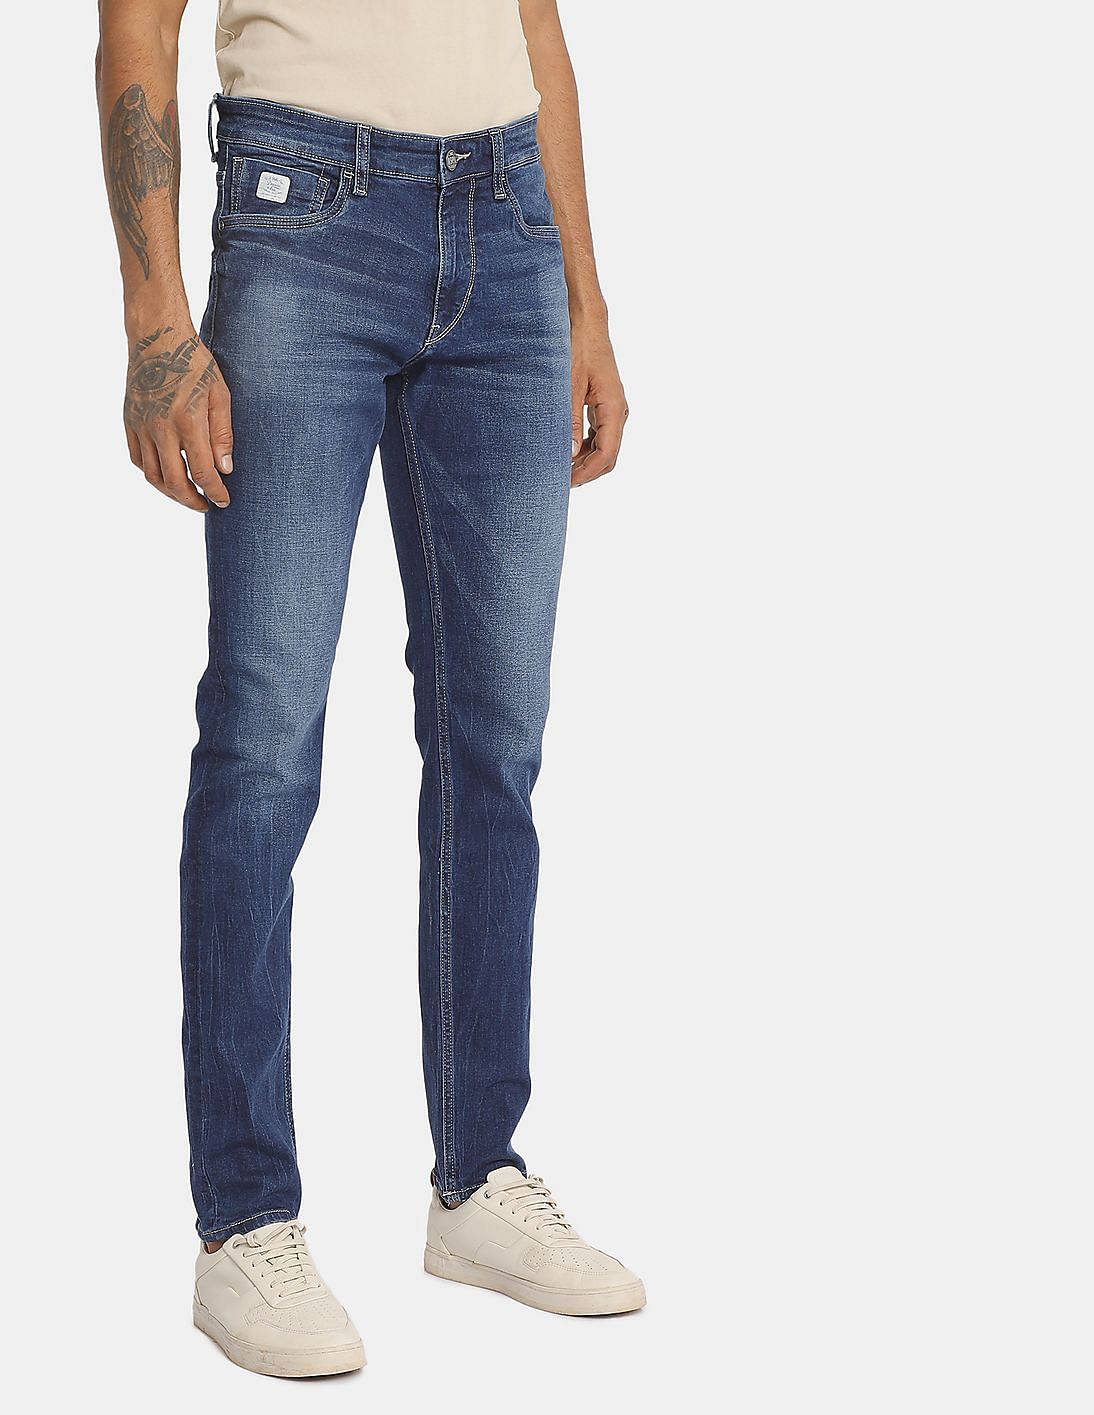 Buy U.S. Polo Assn. Men Blue Mid Rise Slim Tapered Fit Jeans - NNNOW.com